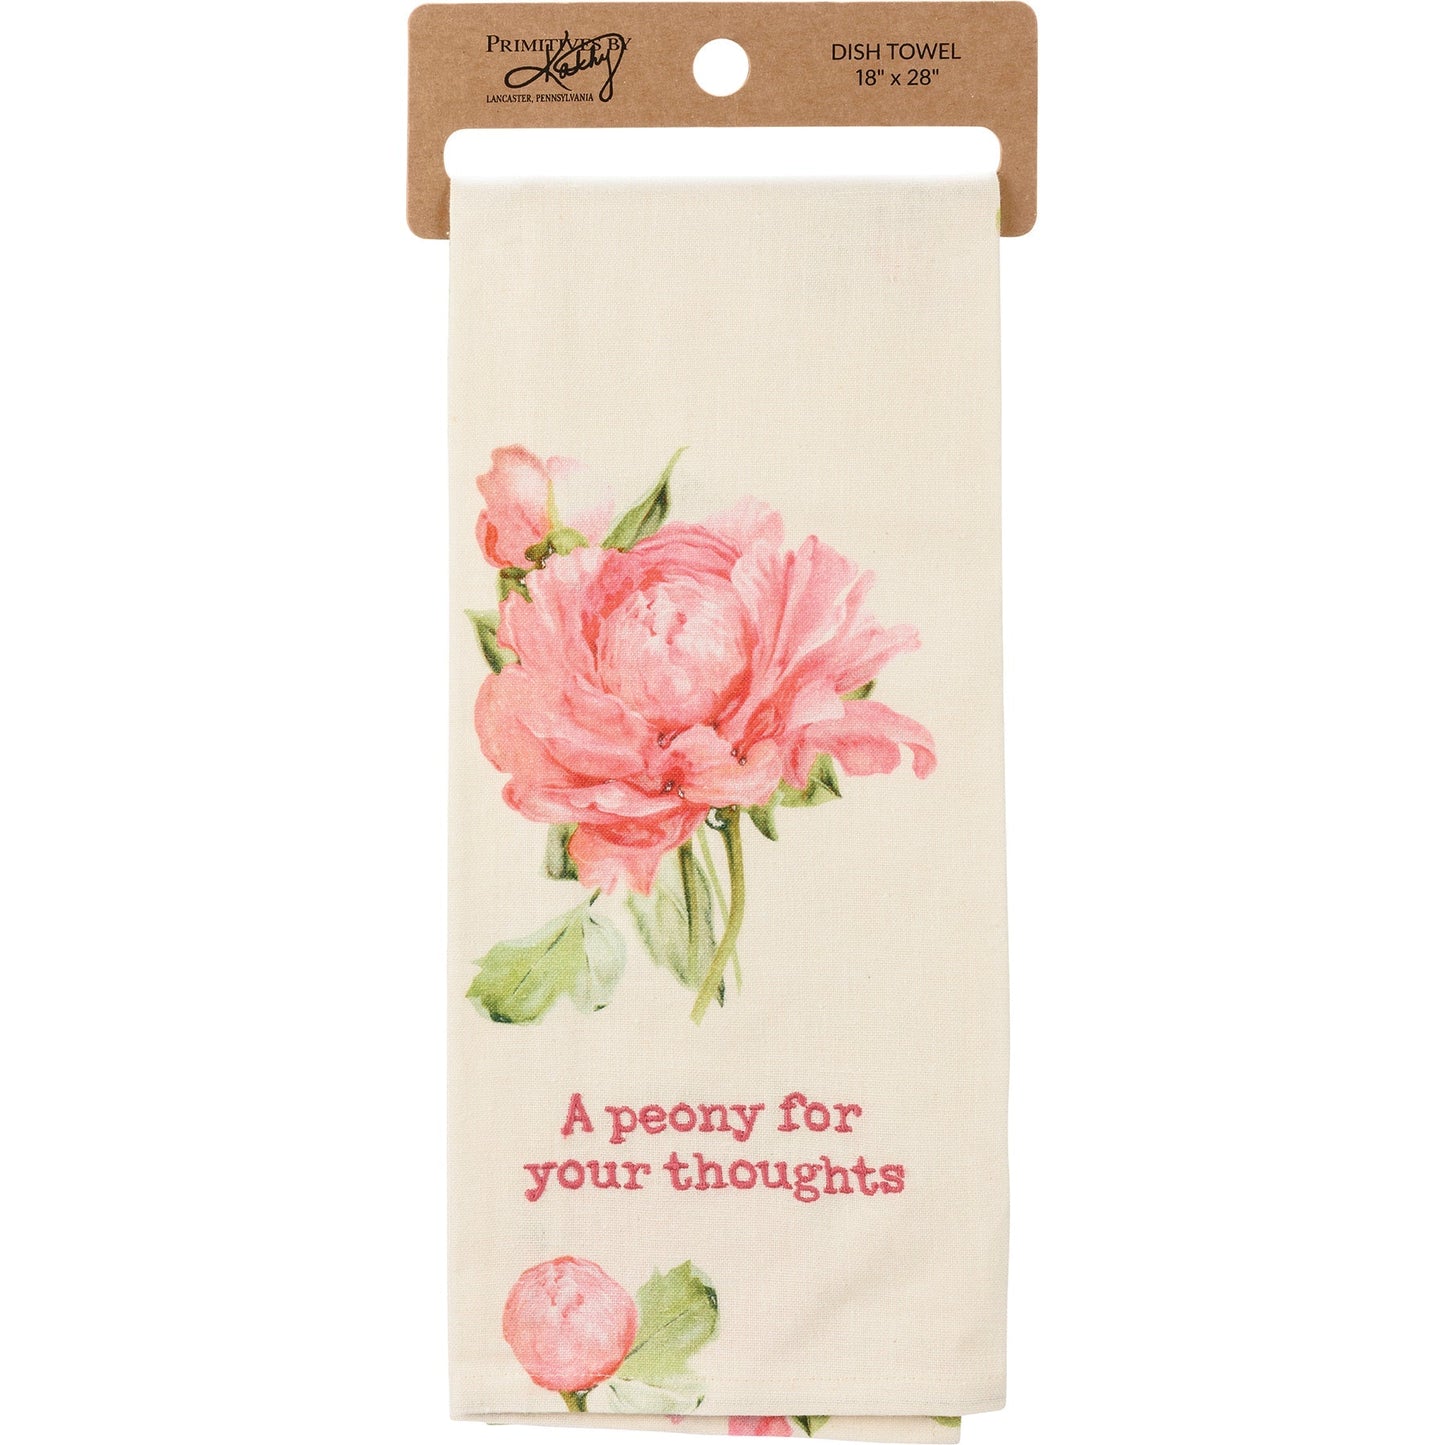 Peony For Your Thoughts Dish Cloth Towel | Cotten Linen Novelty Tea Towel | Cute Kitchen Hand Towel | 18" x 28"